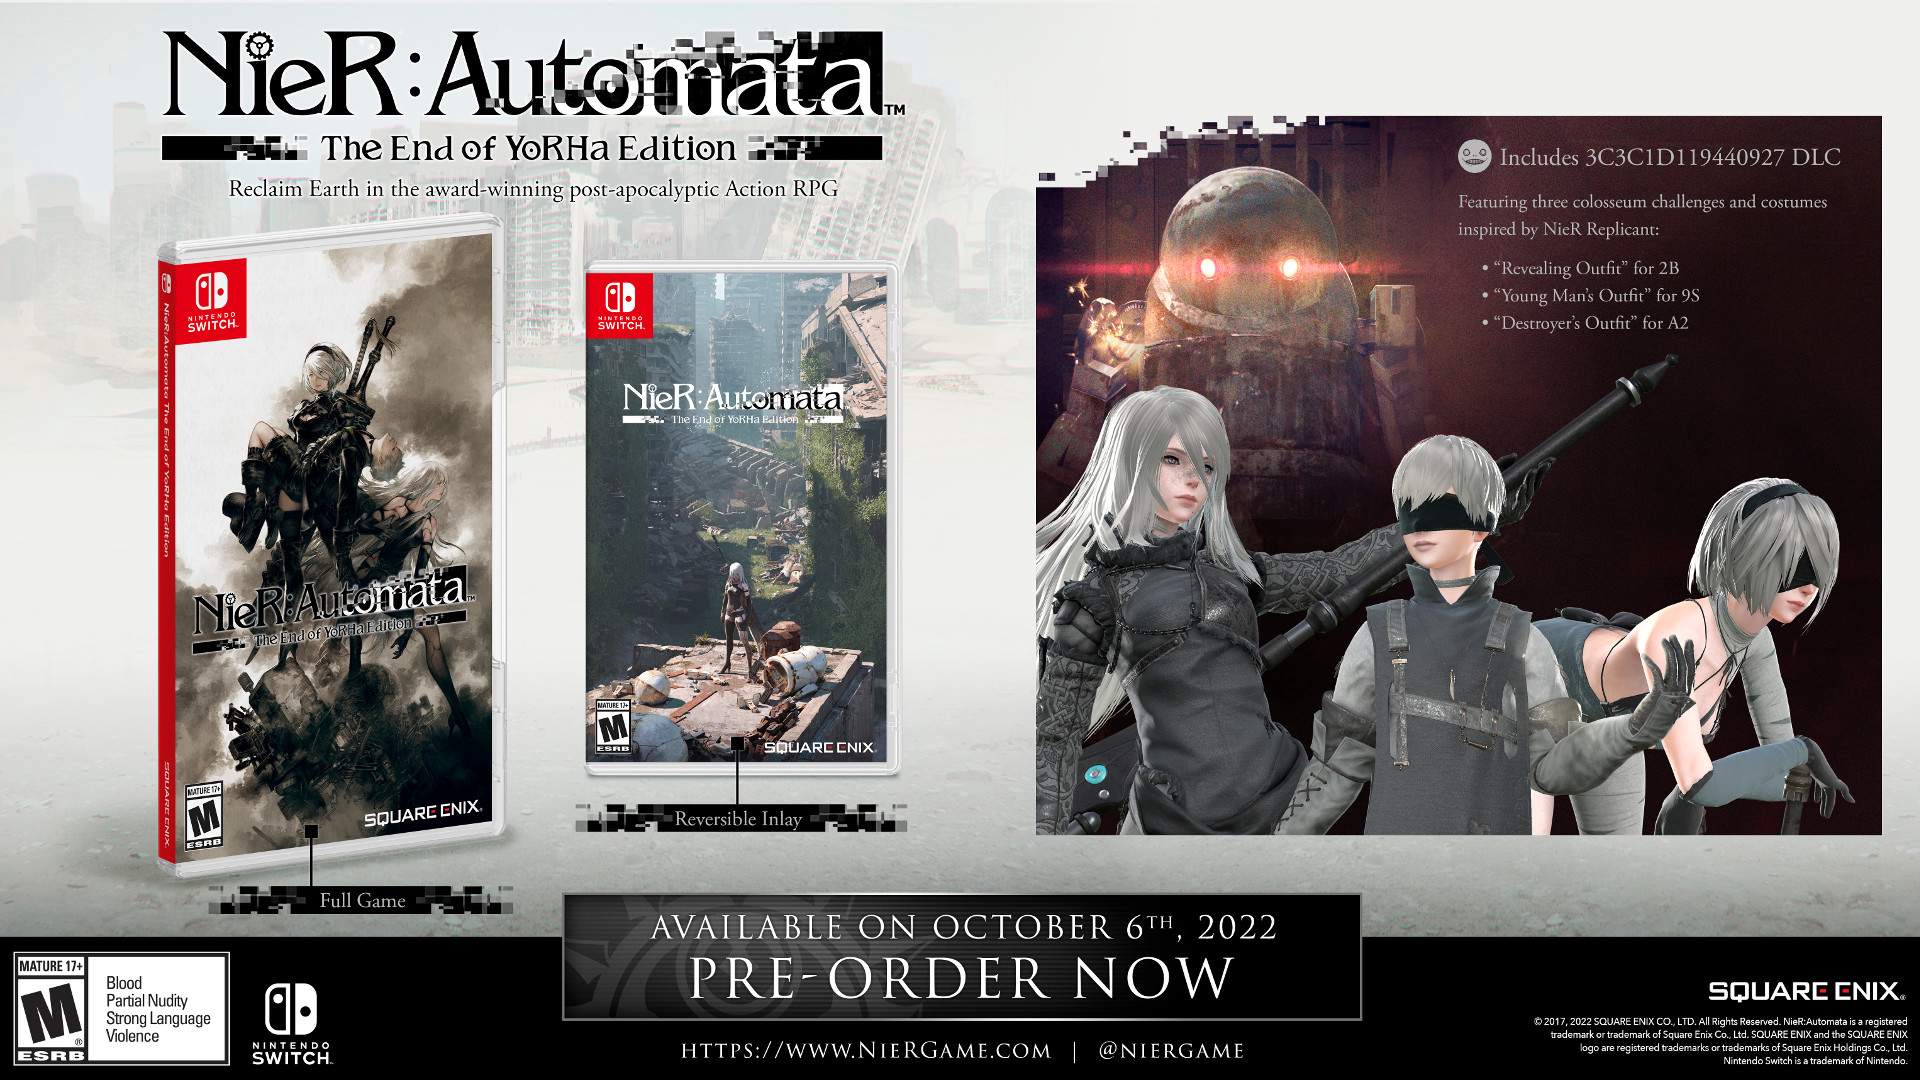 Nier: Automata is coming to Switch